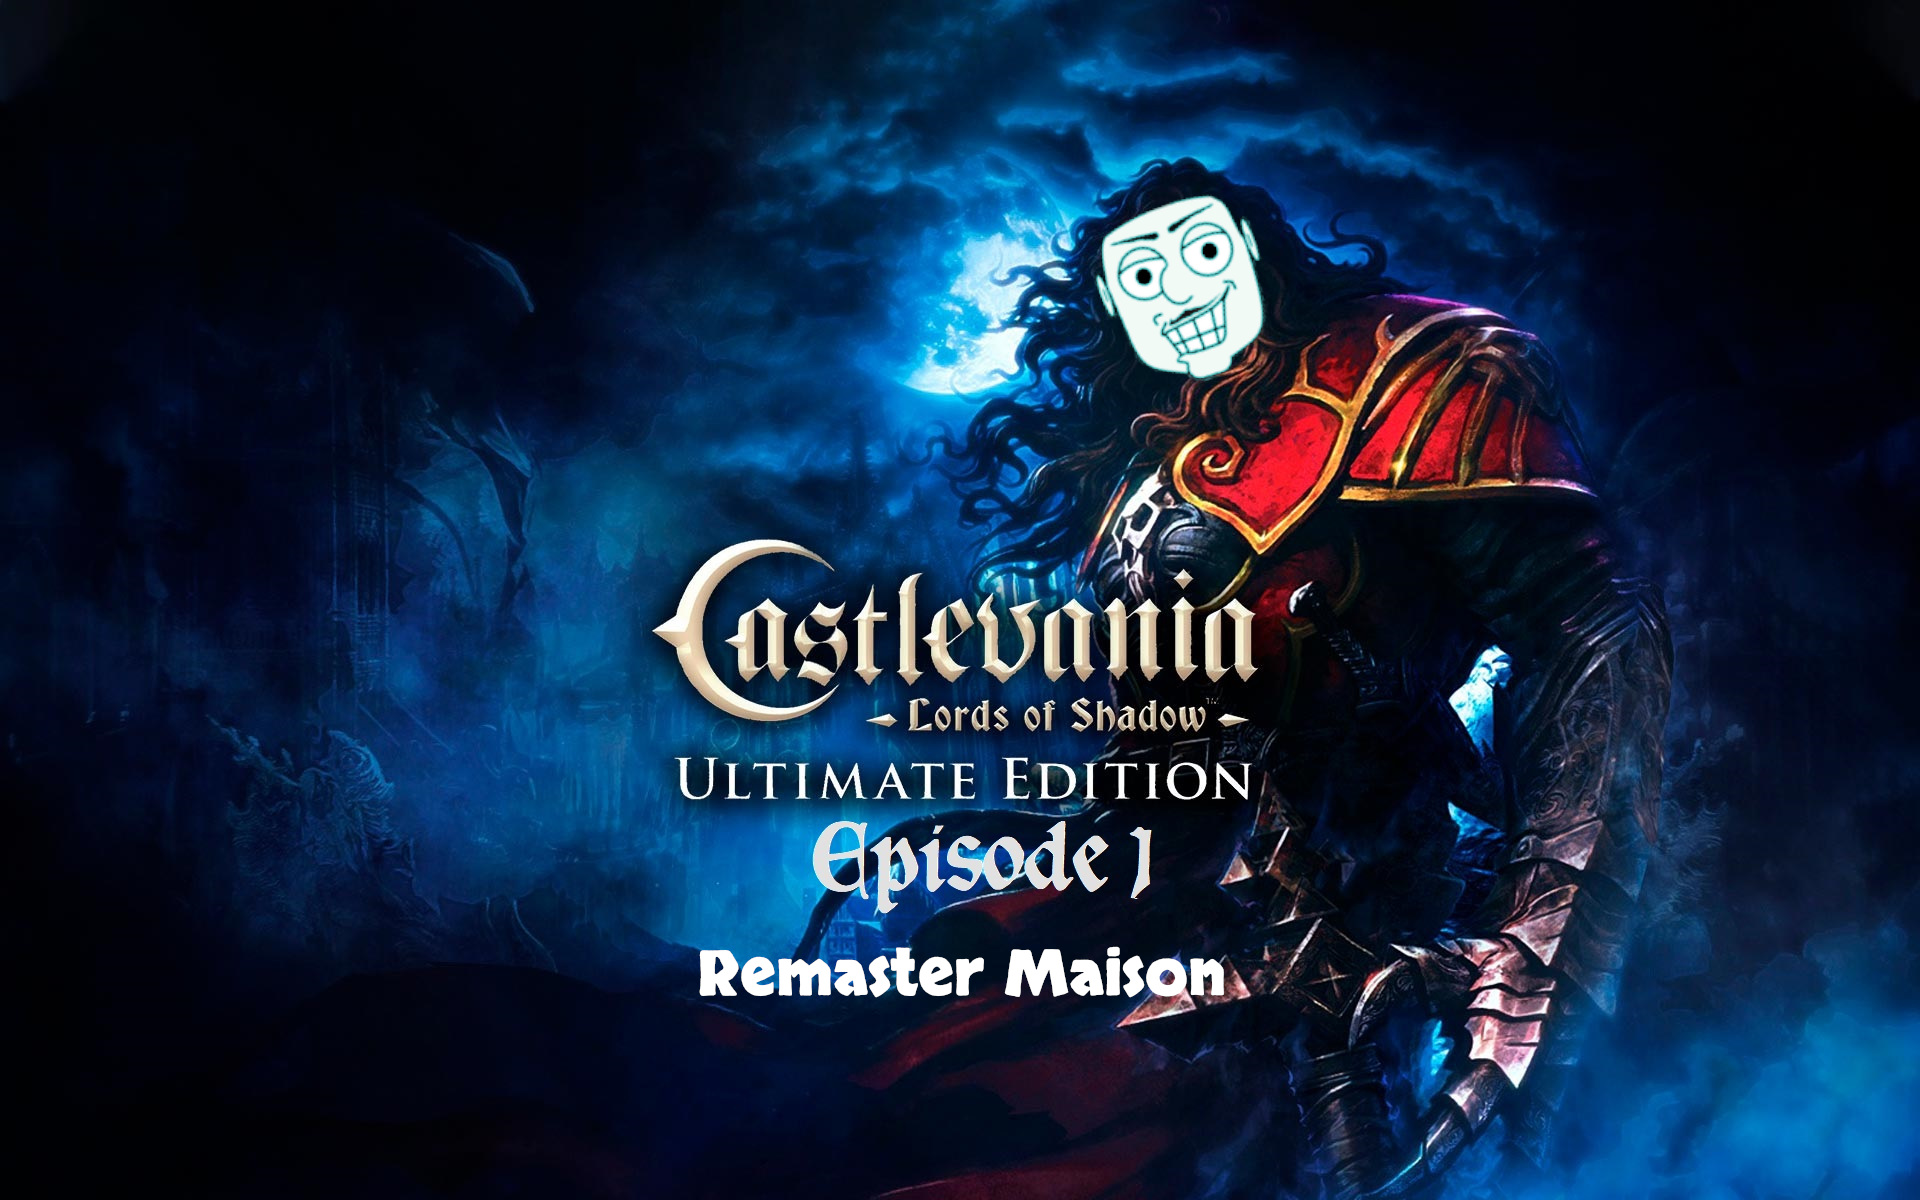 Thoughts On: Castlevania: Lords of Shadow – Ultimate Edition